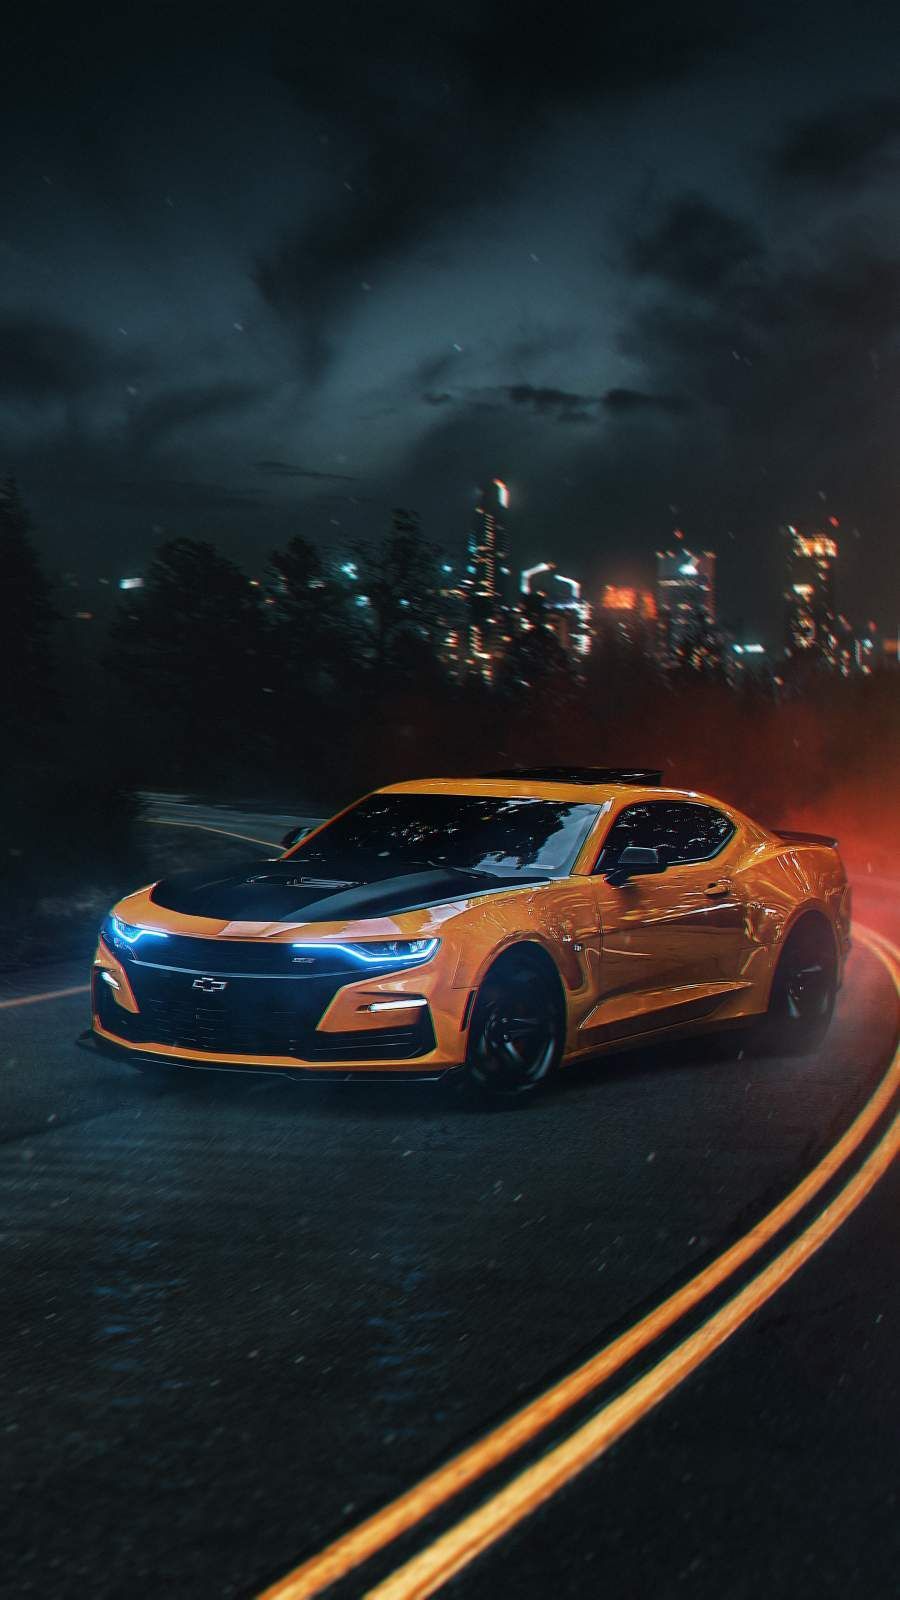 iPhone Wallpaper HD Download for iPhone iPhone iPhone iPhone X, iPhone XR High Quality Wallpaper, iPad Wallpaper. Chevy camaro, Camaro car, Camaro